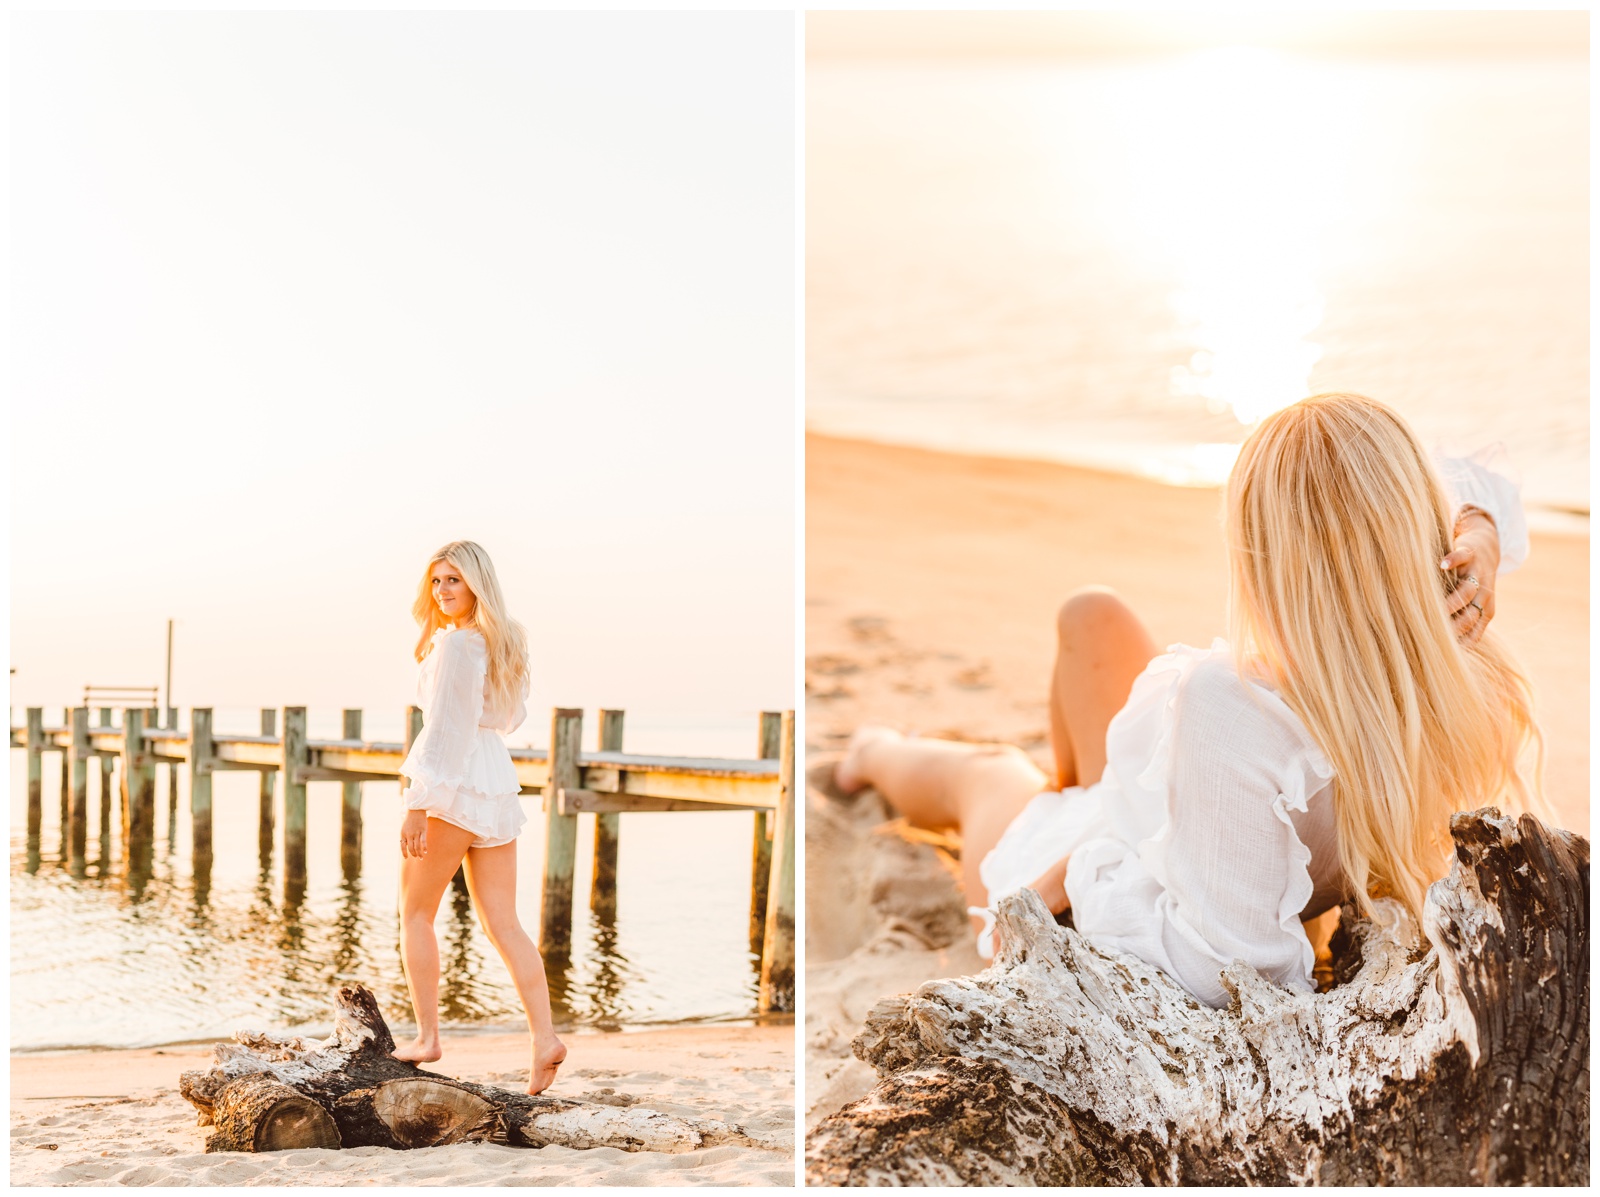 Colorful and Adventurous Senior Portrait Session on an Island - Brooke Michelle Photo